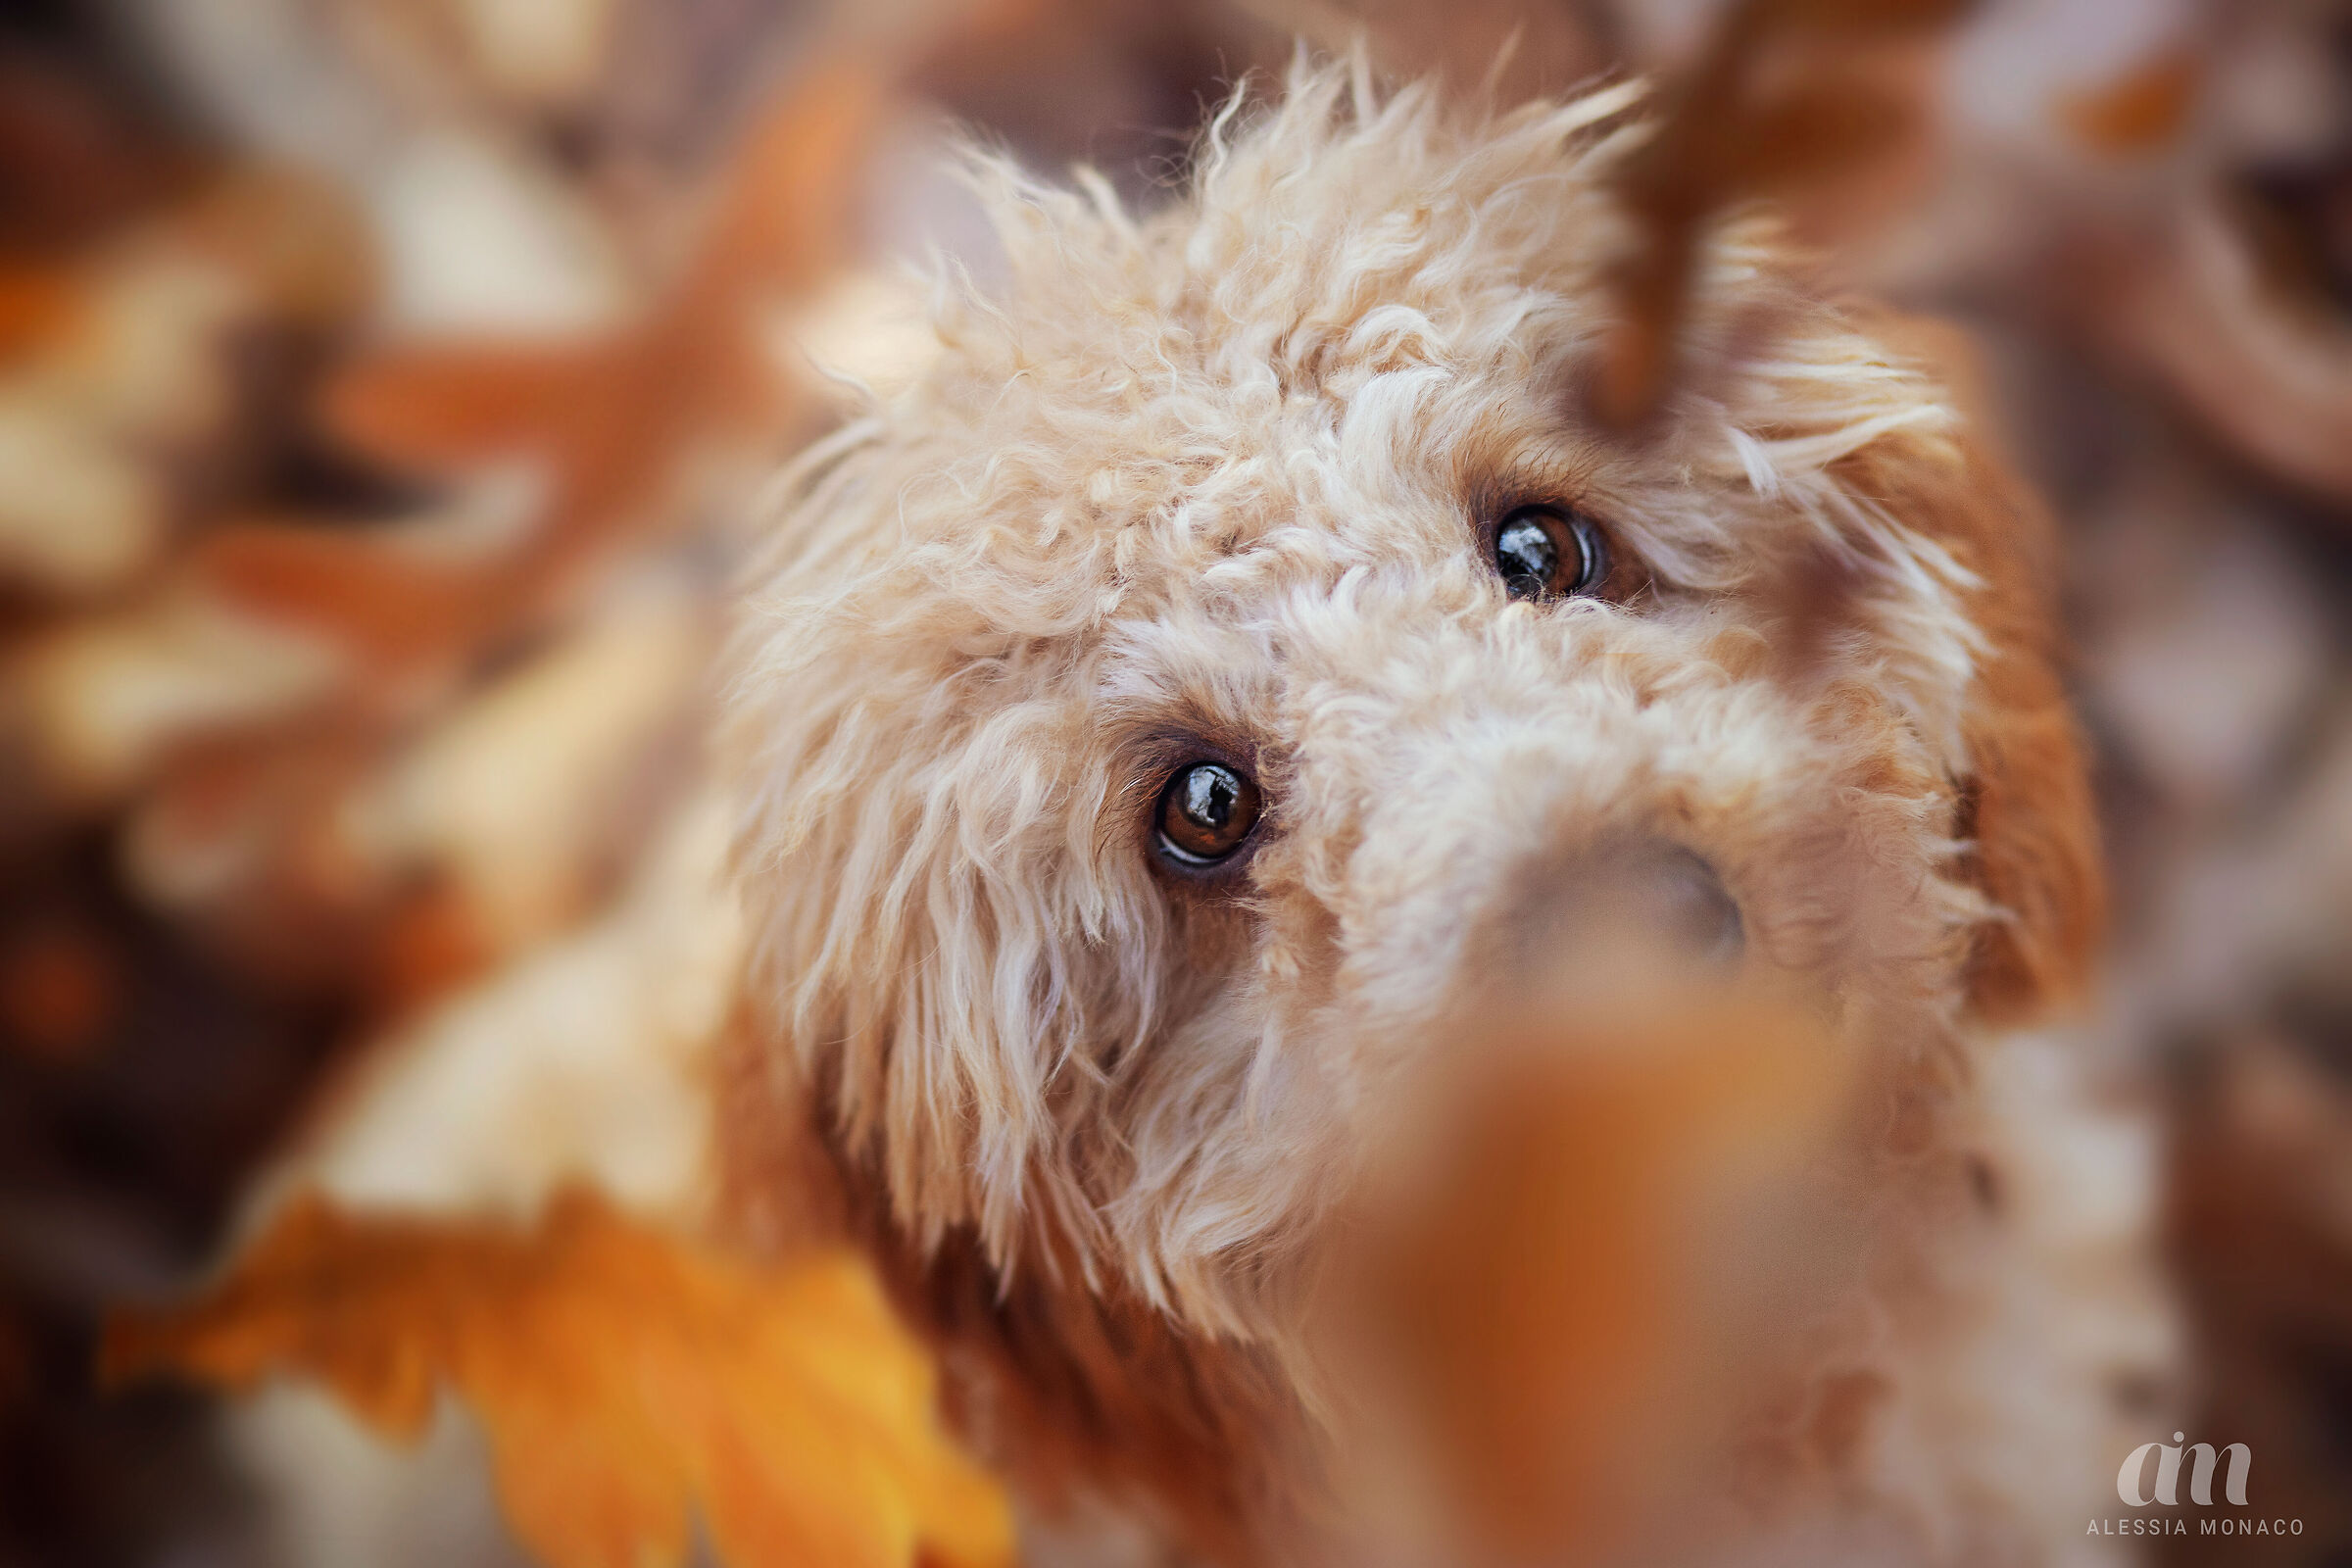 Poodle in autumn - Barboncino in autunno...